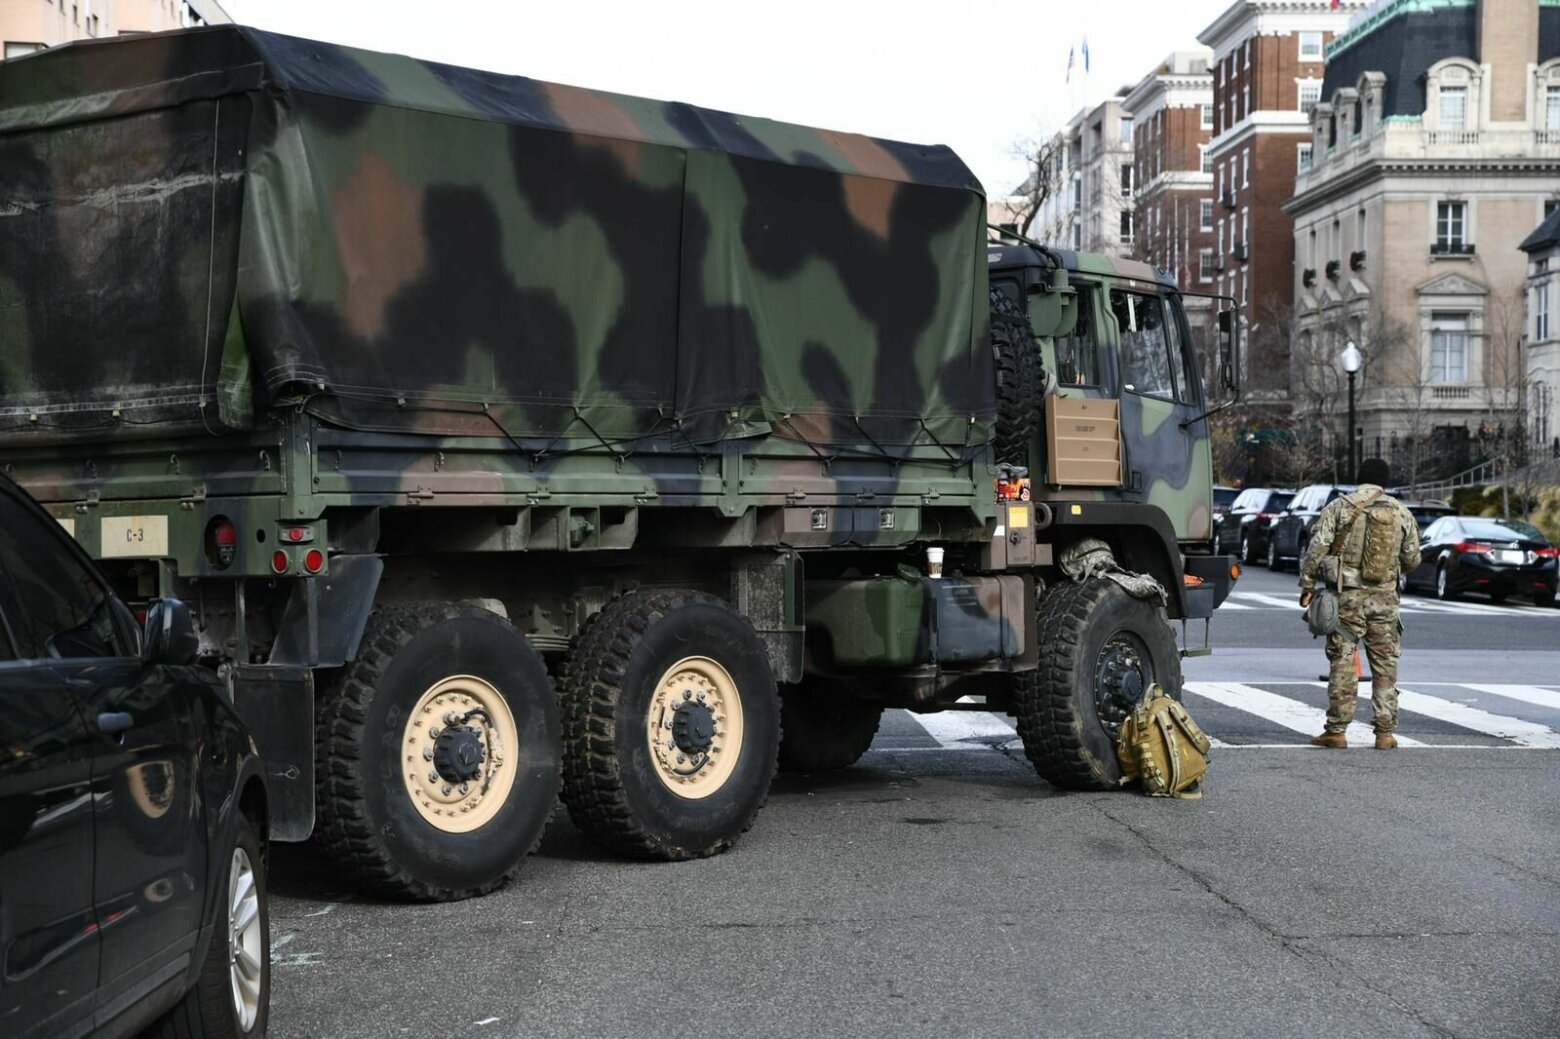 <p>A military vehicle sits in the streets of D.C. on Sunday.</p>
